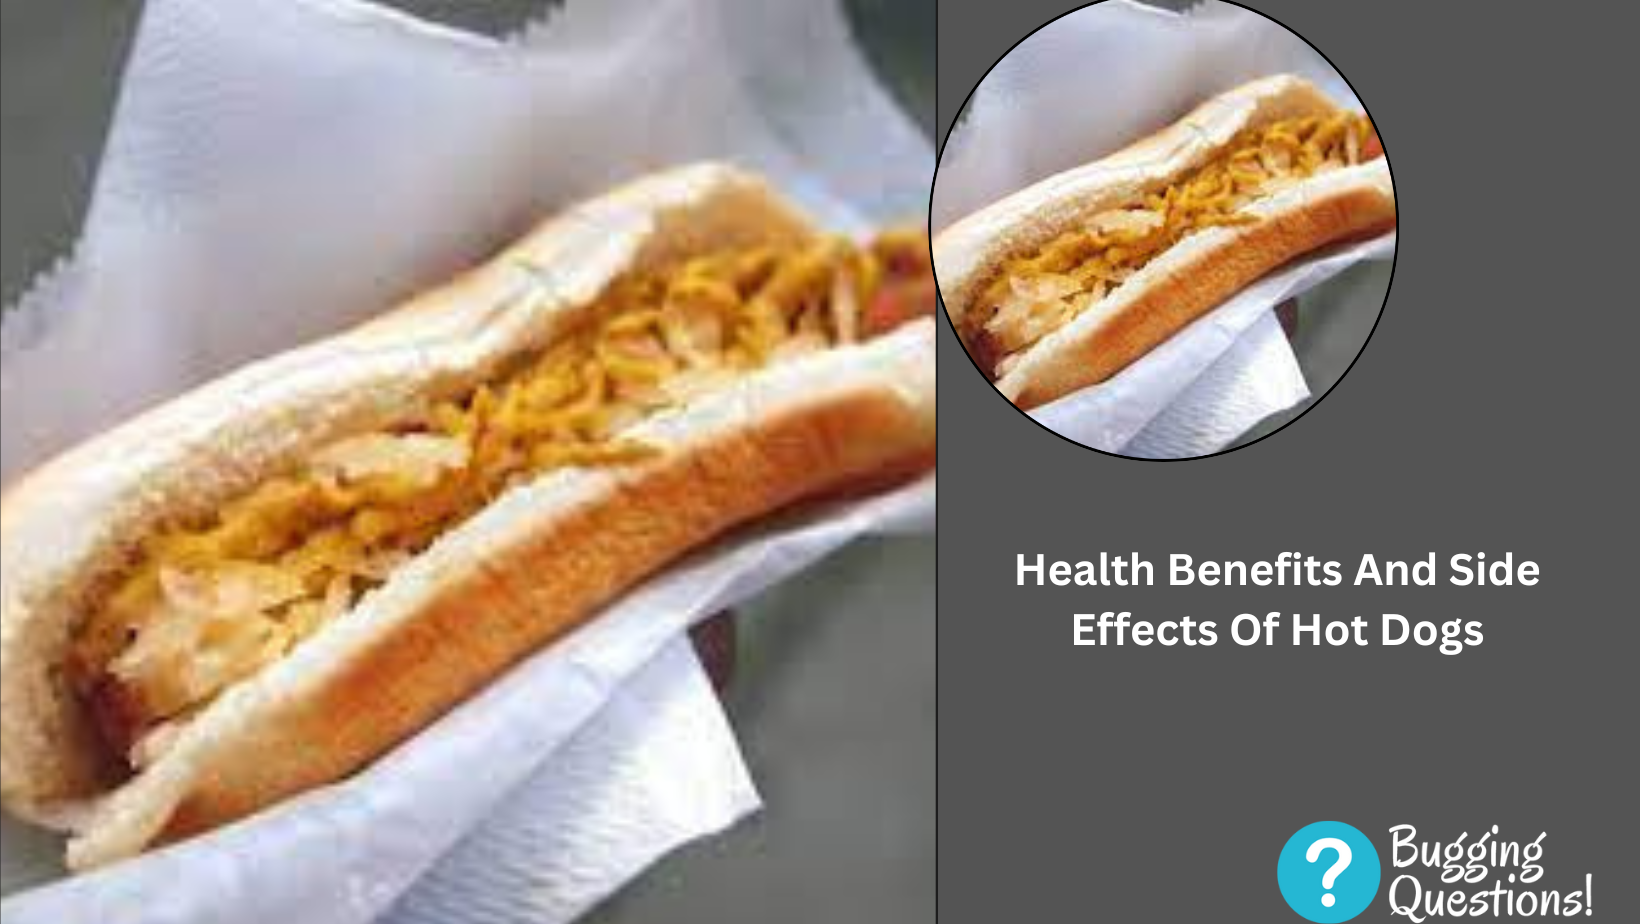 Health Benefits And Side Effects Of Hot Dogs